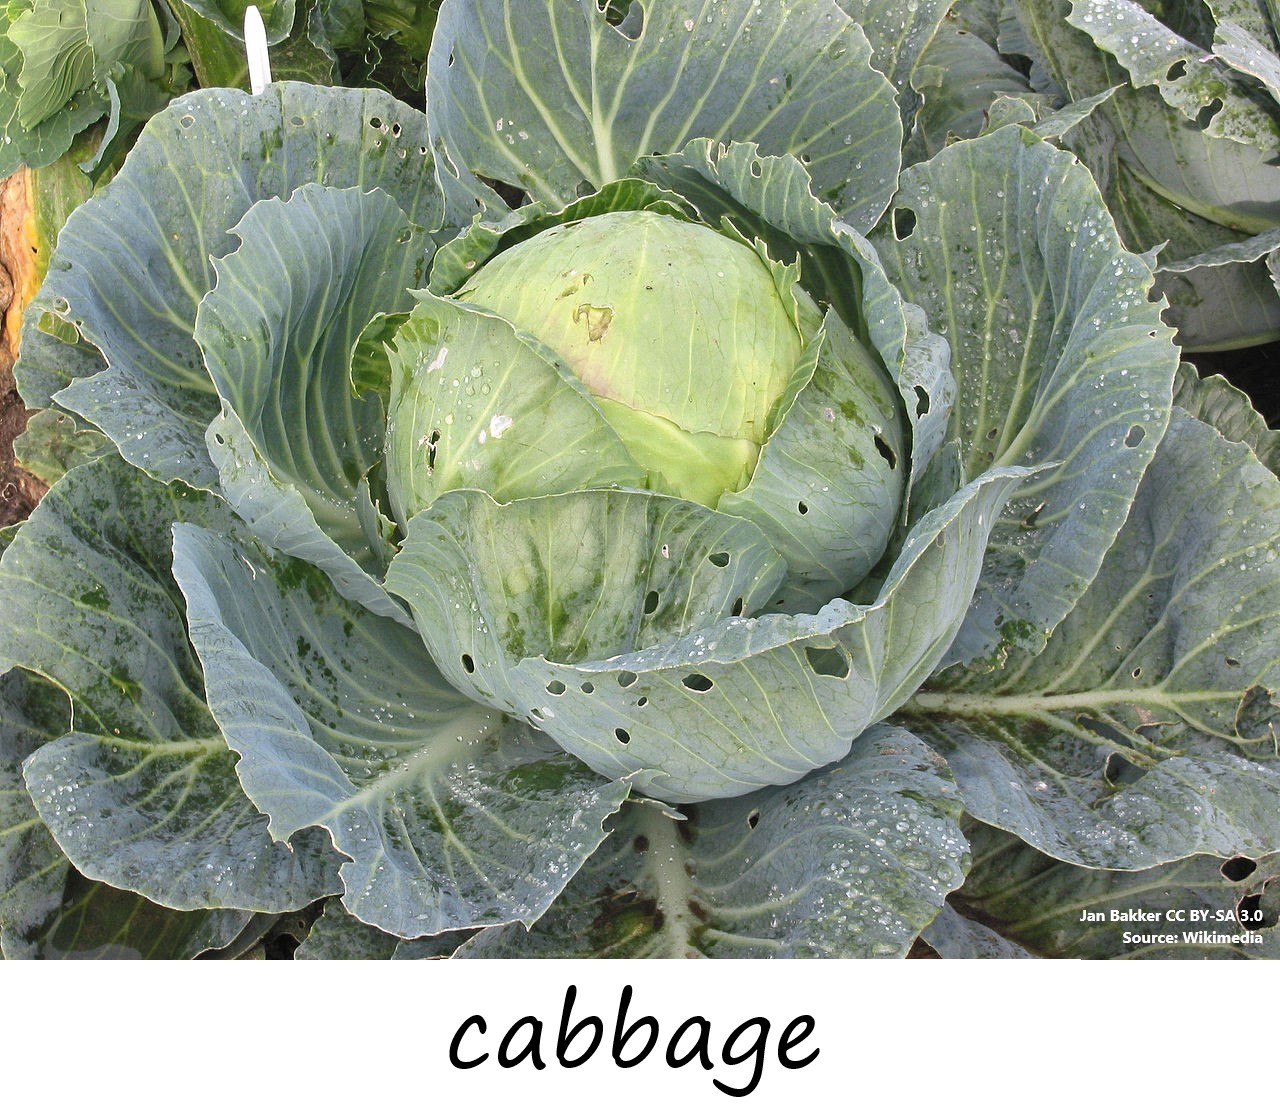 Cabbage photo with label